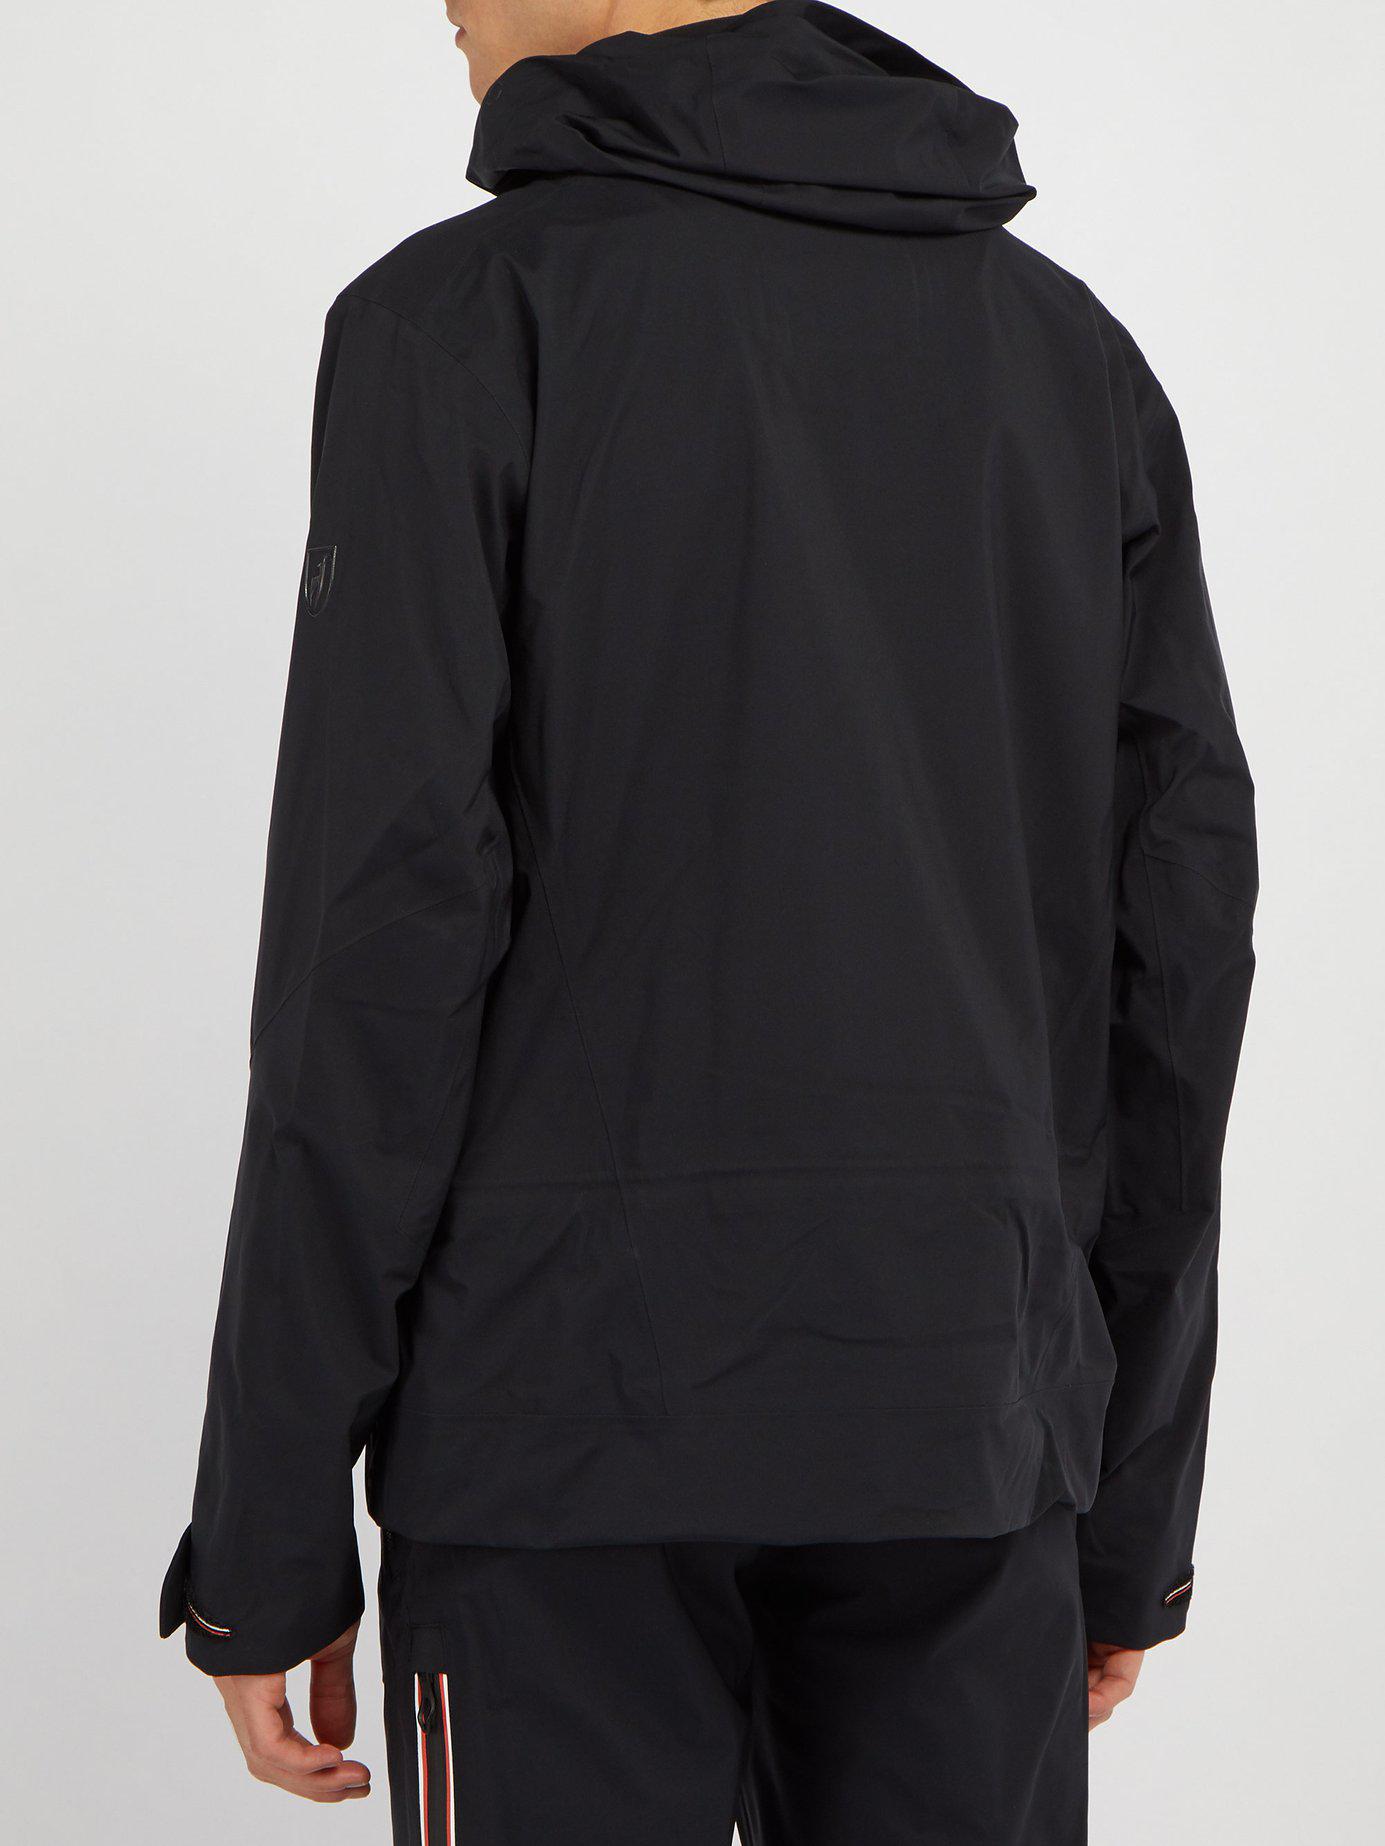 Toni Sailer Synthetic Streif Edition Technical Hooded Jacket in Black ...